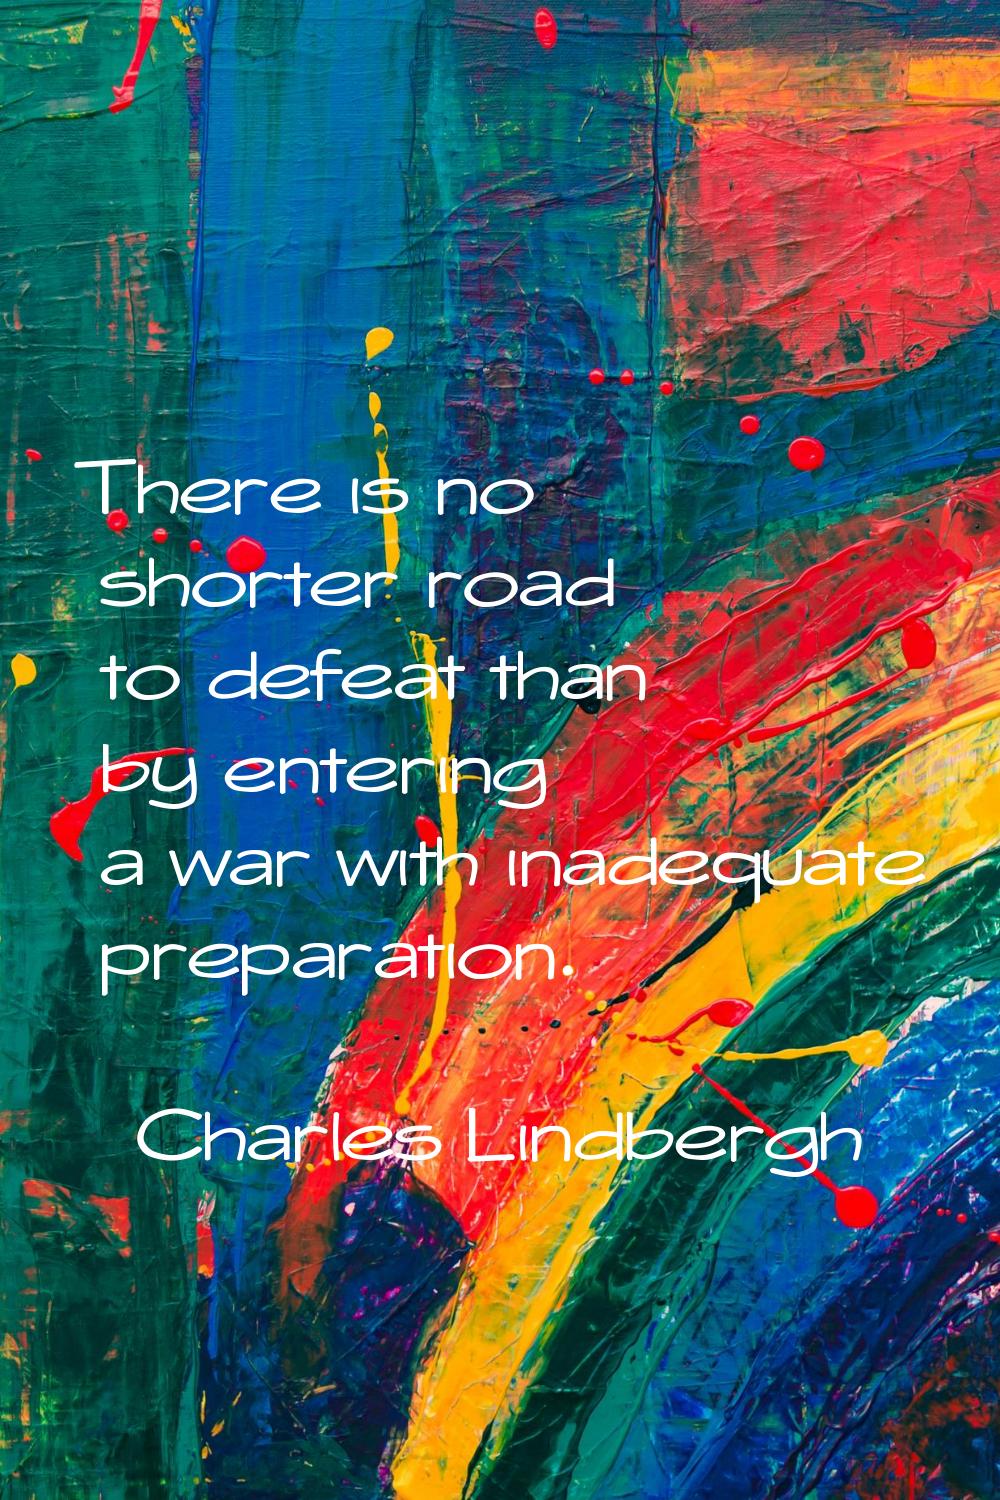 There is no shorter road to defeat than by entering a war with inadequate preparation.